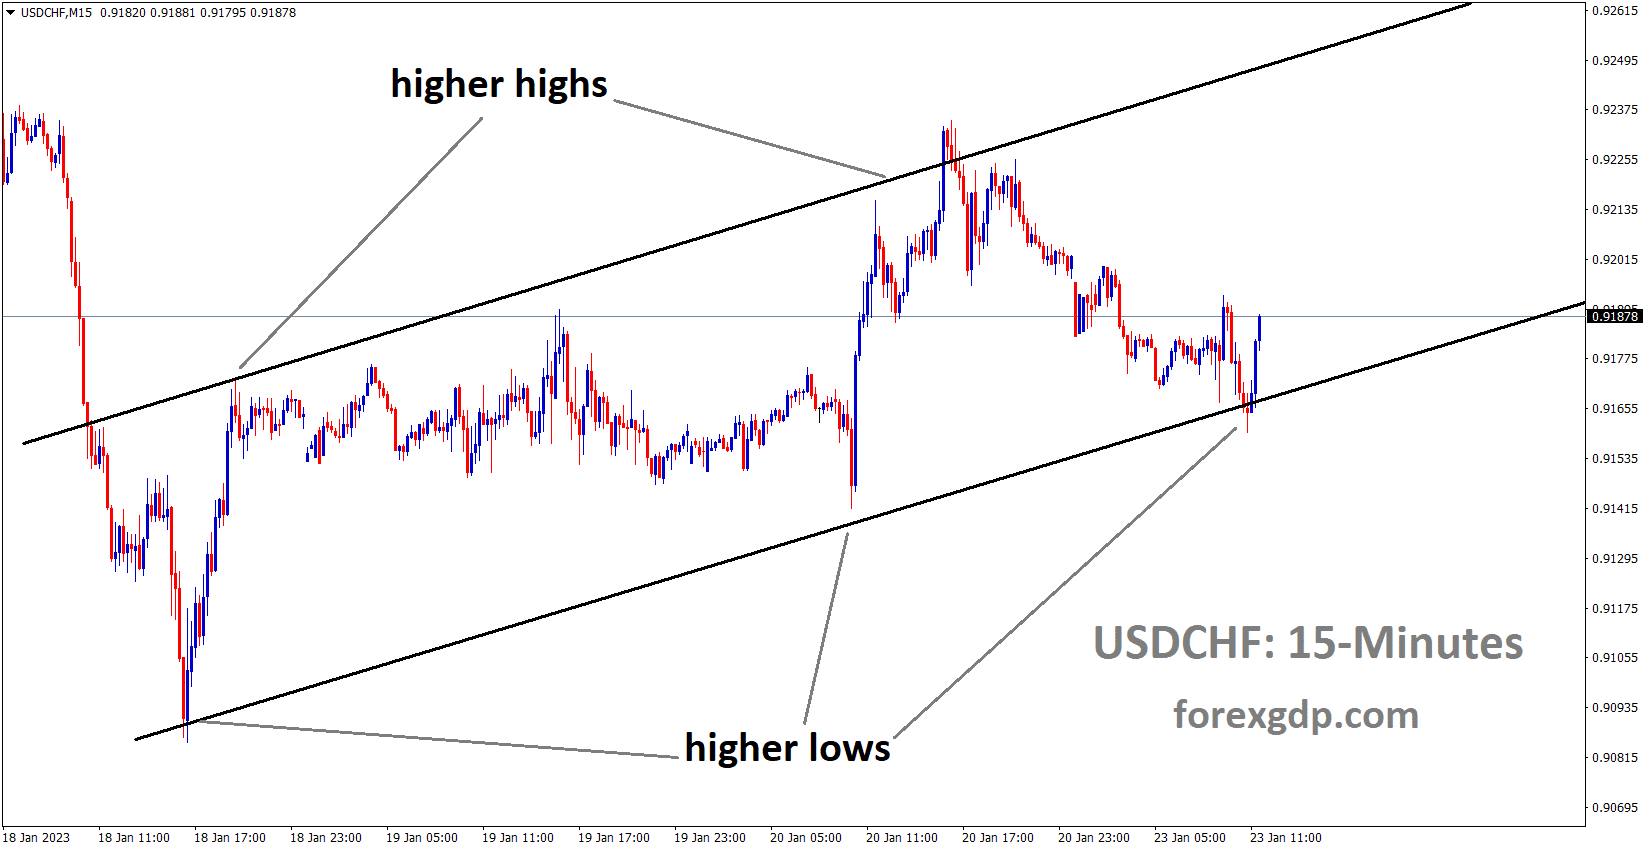 USDCHF is moving in an Ascending channel and the market has rebounded from the higher low area of the channel